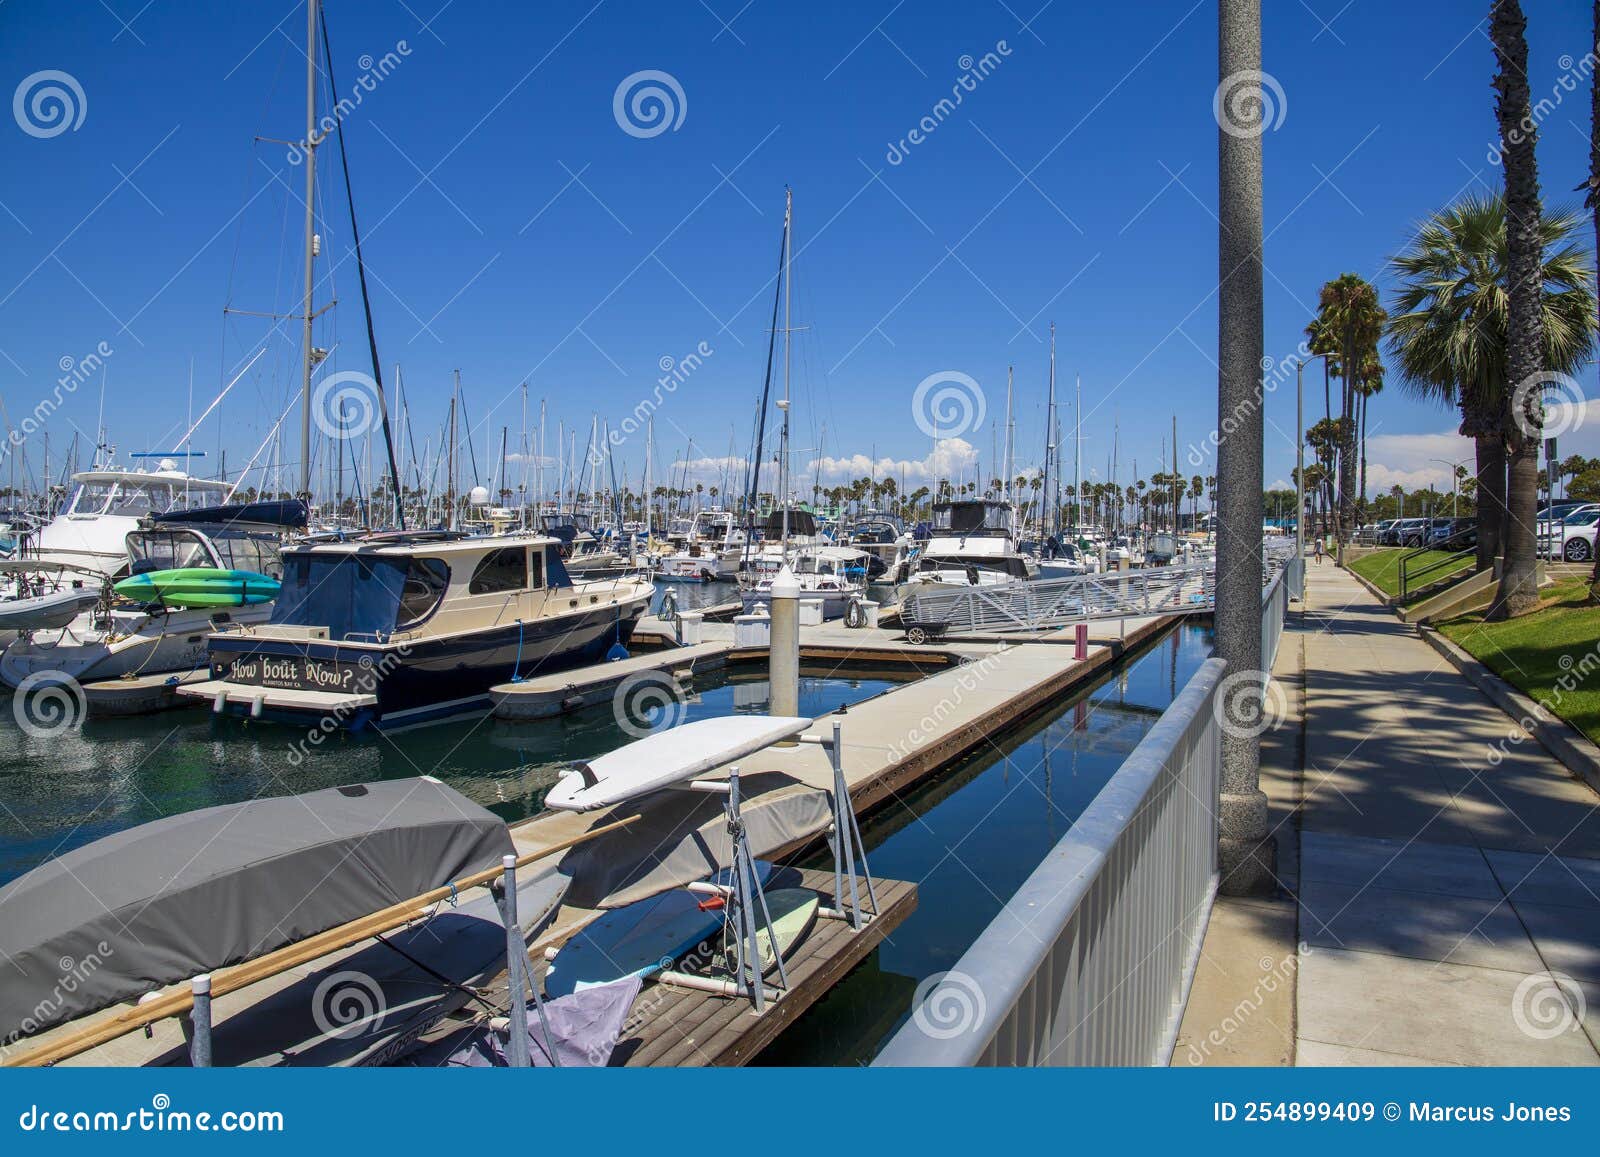 A Gorgeous Summer Landscape in the Marina with Boats and Yachts Docked ...